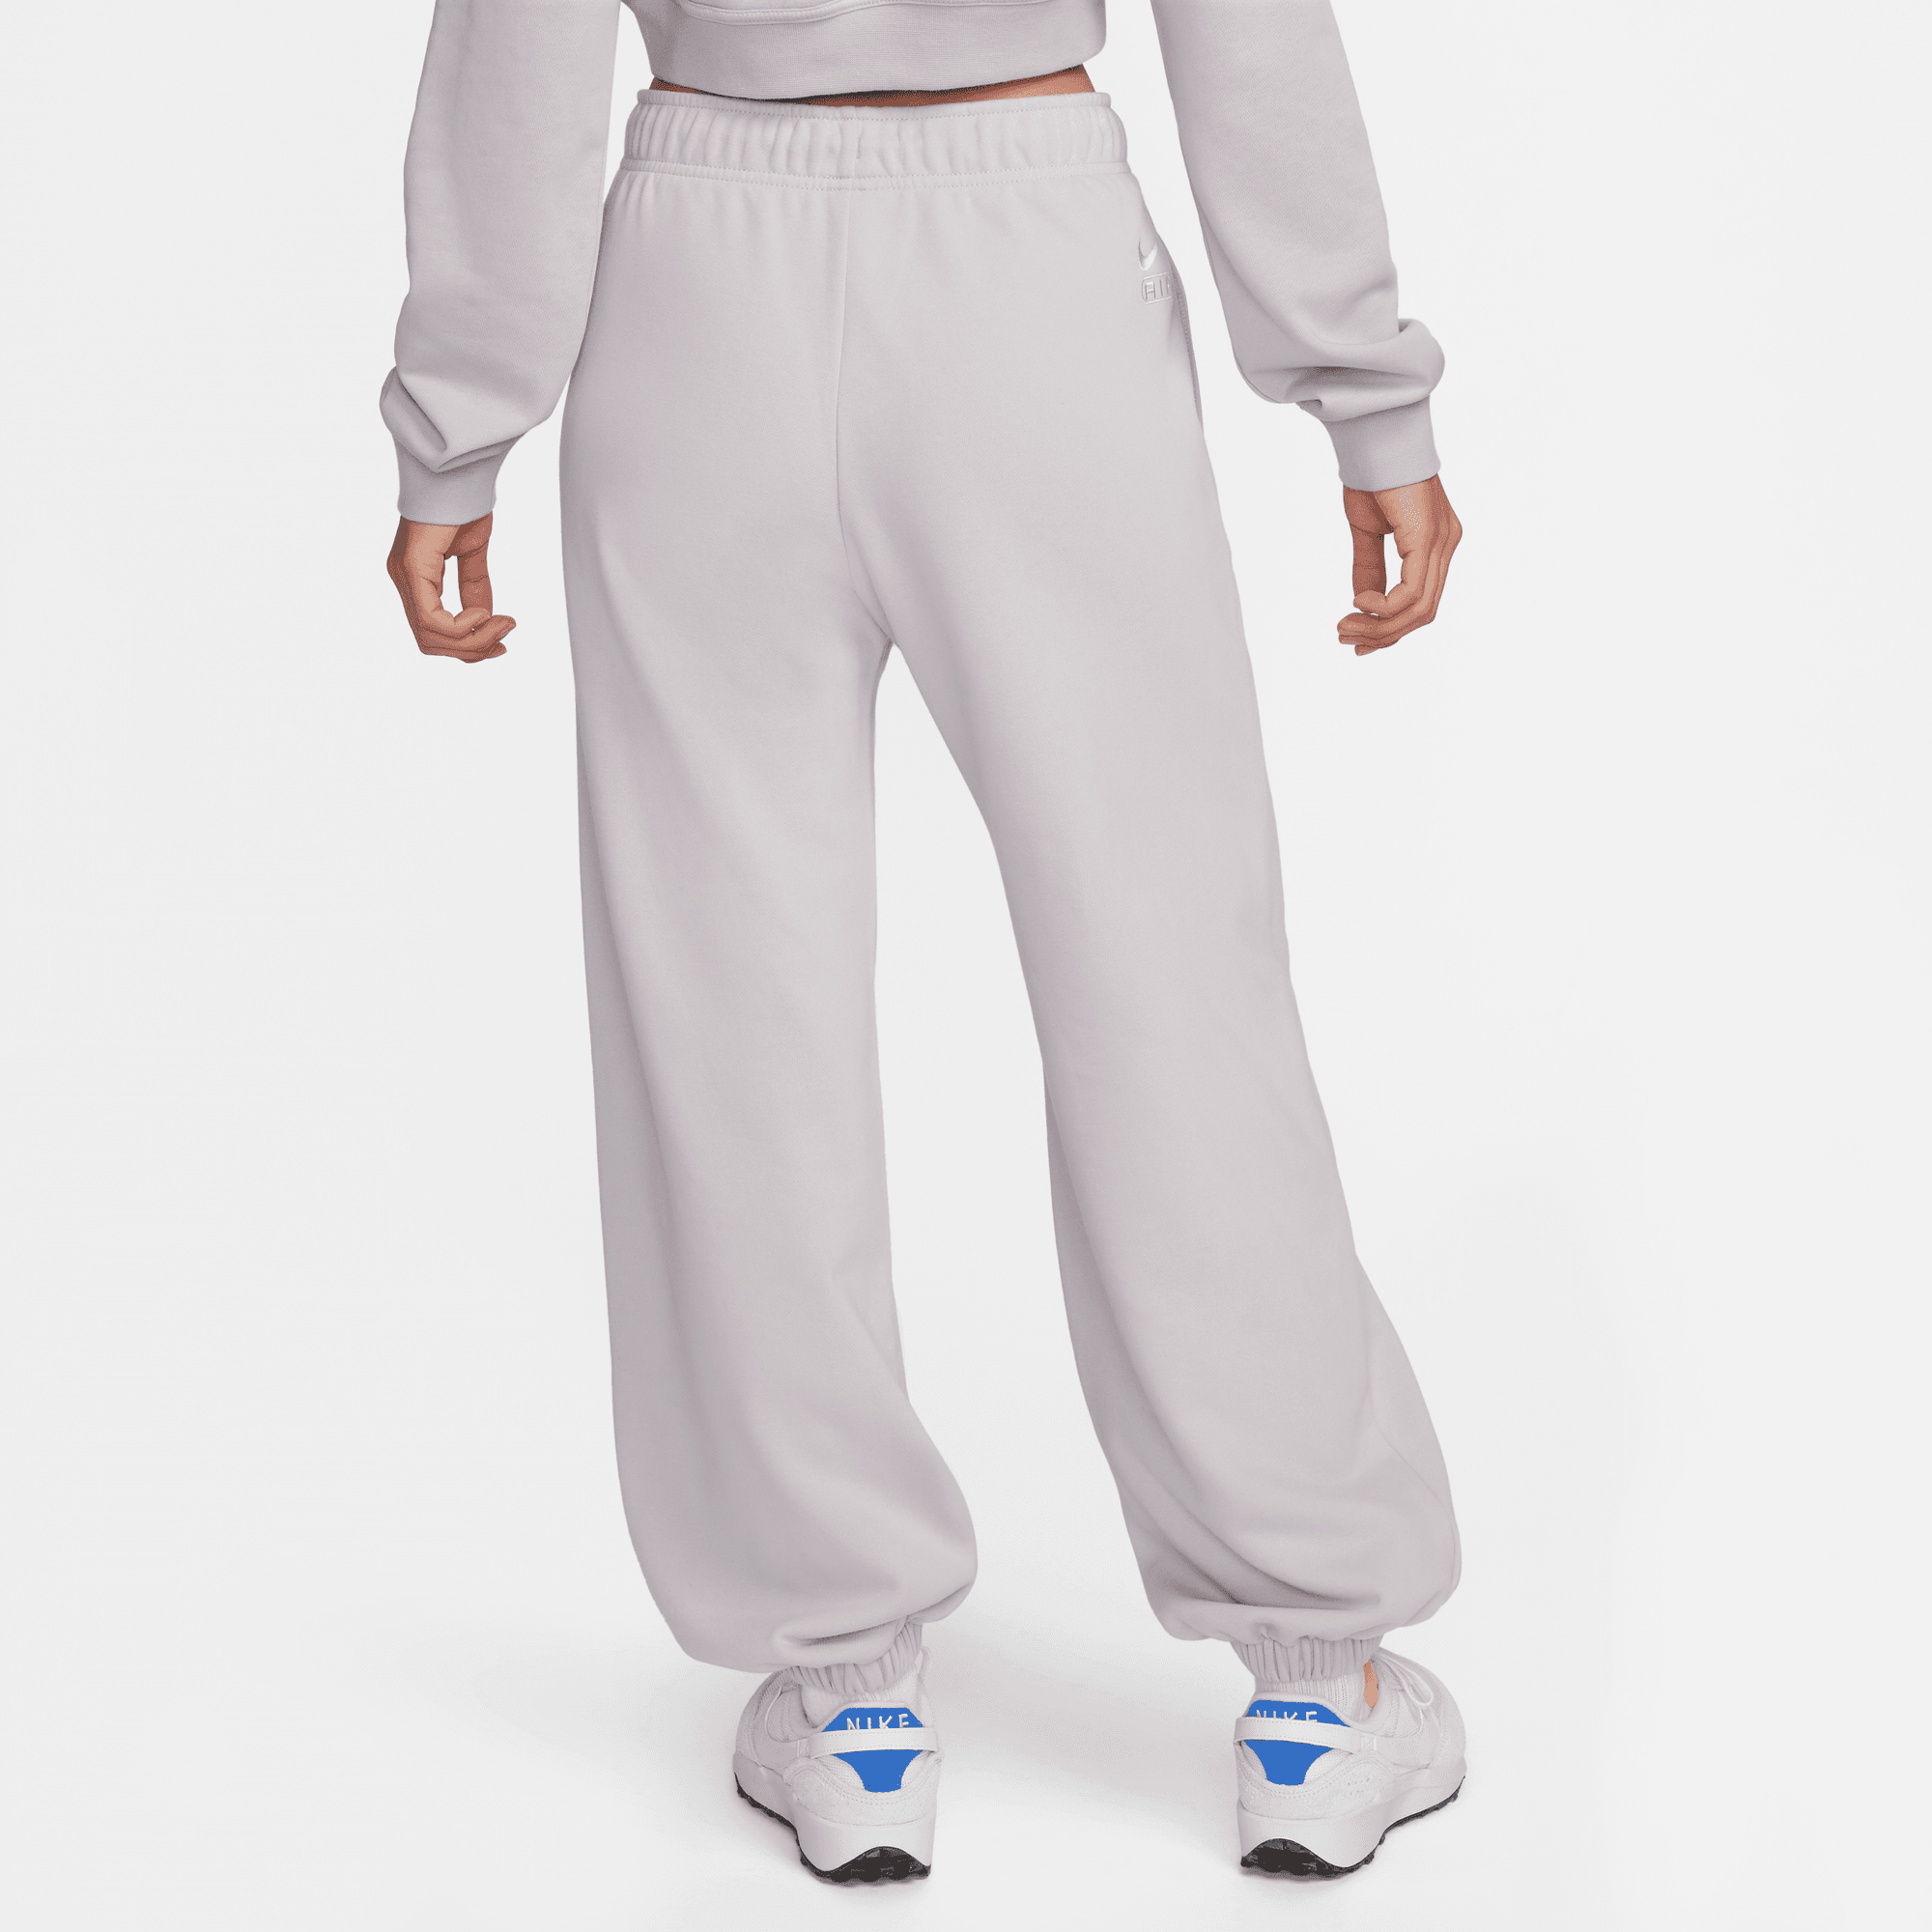 Nike One (M) Women's French Terry Pants (Maternity).